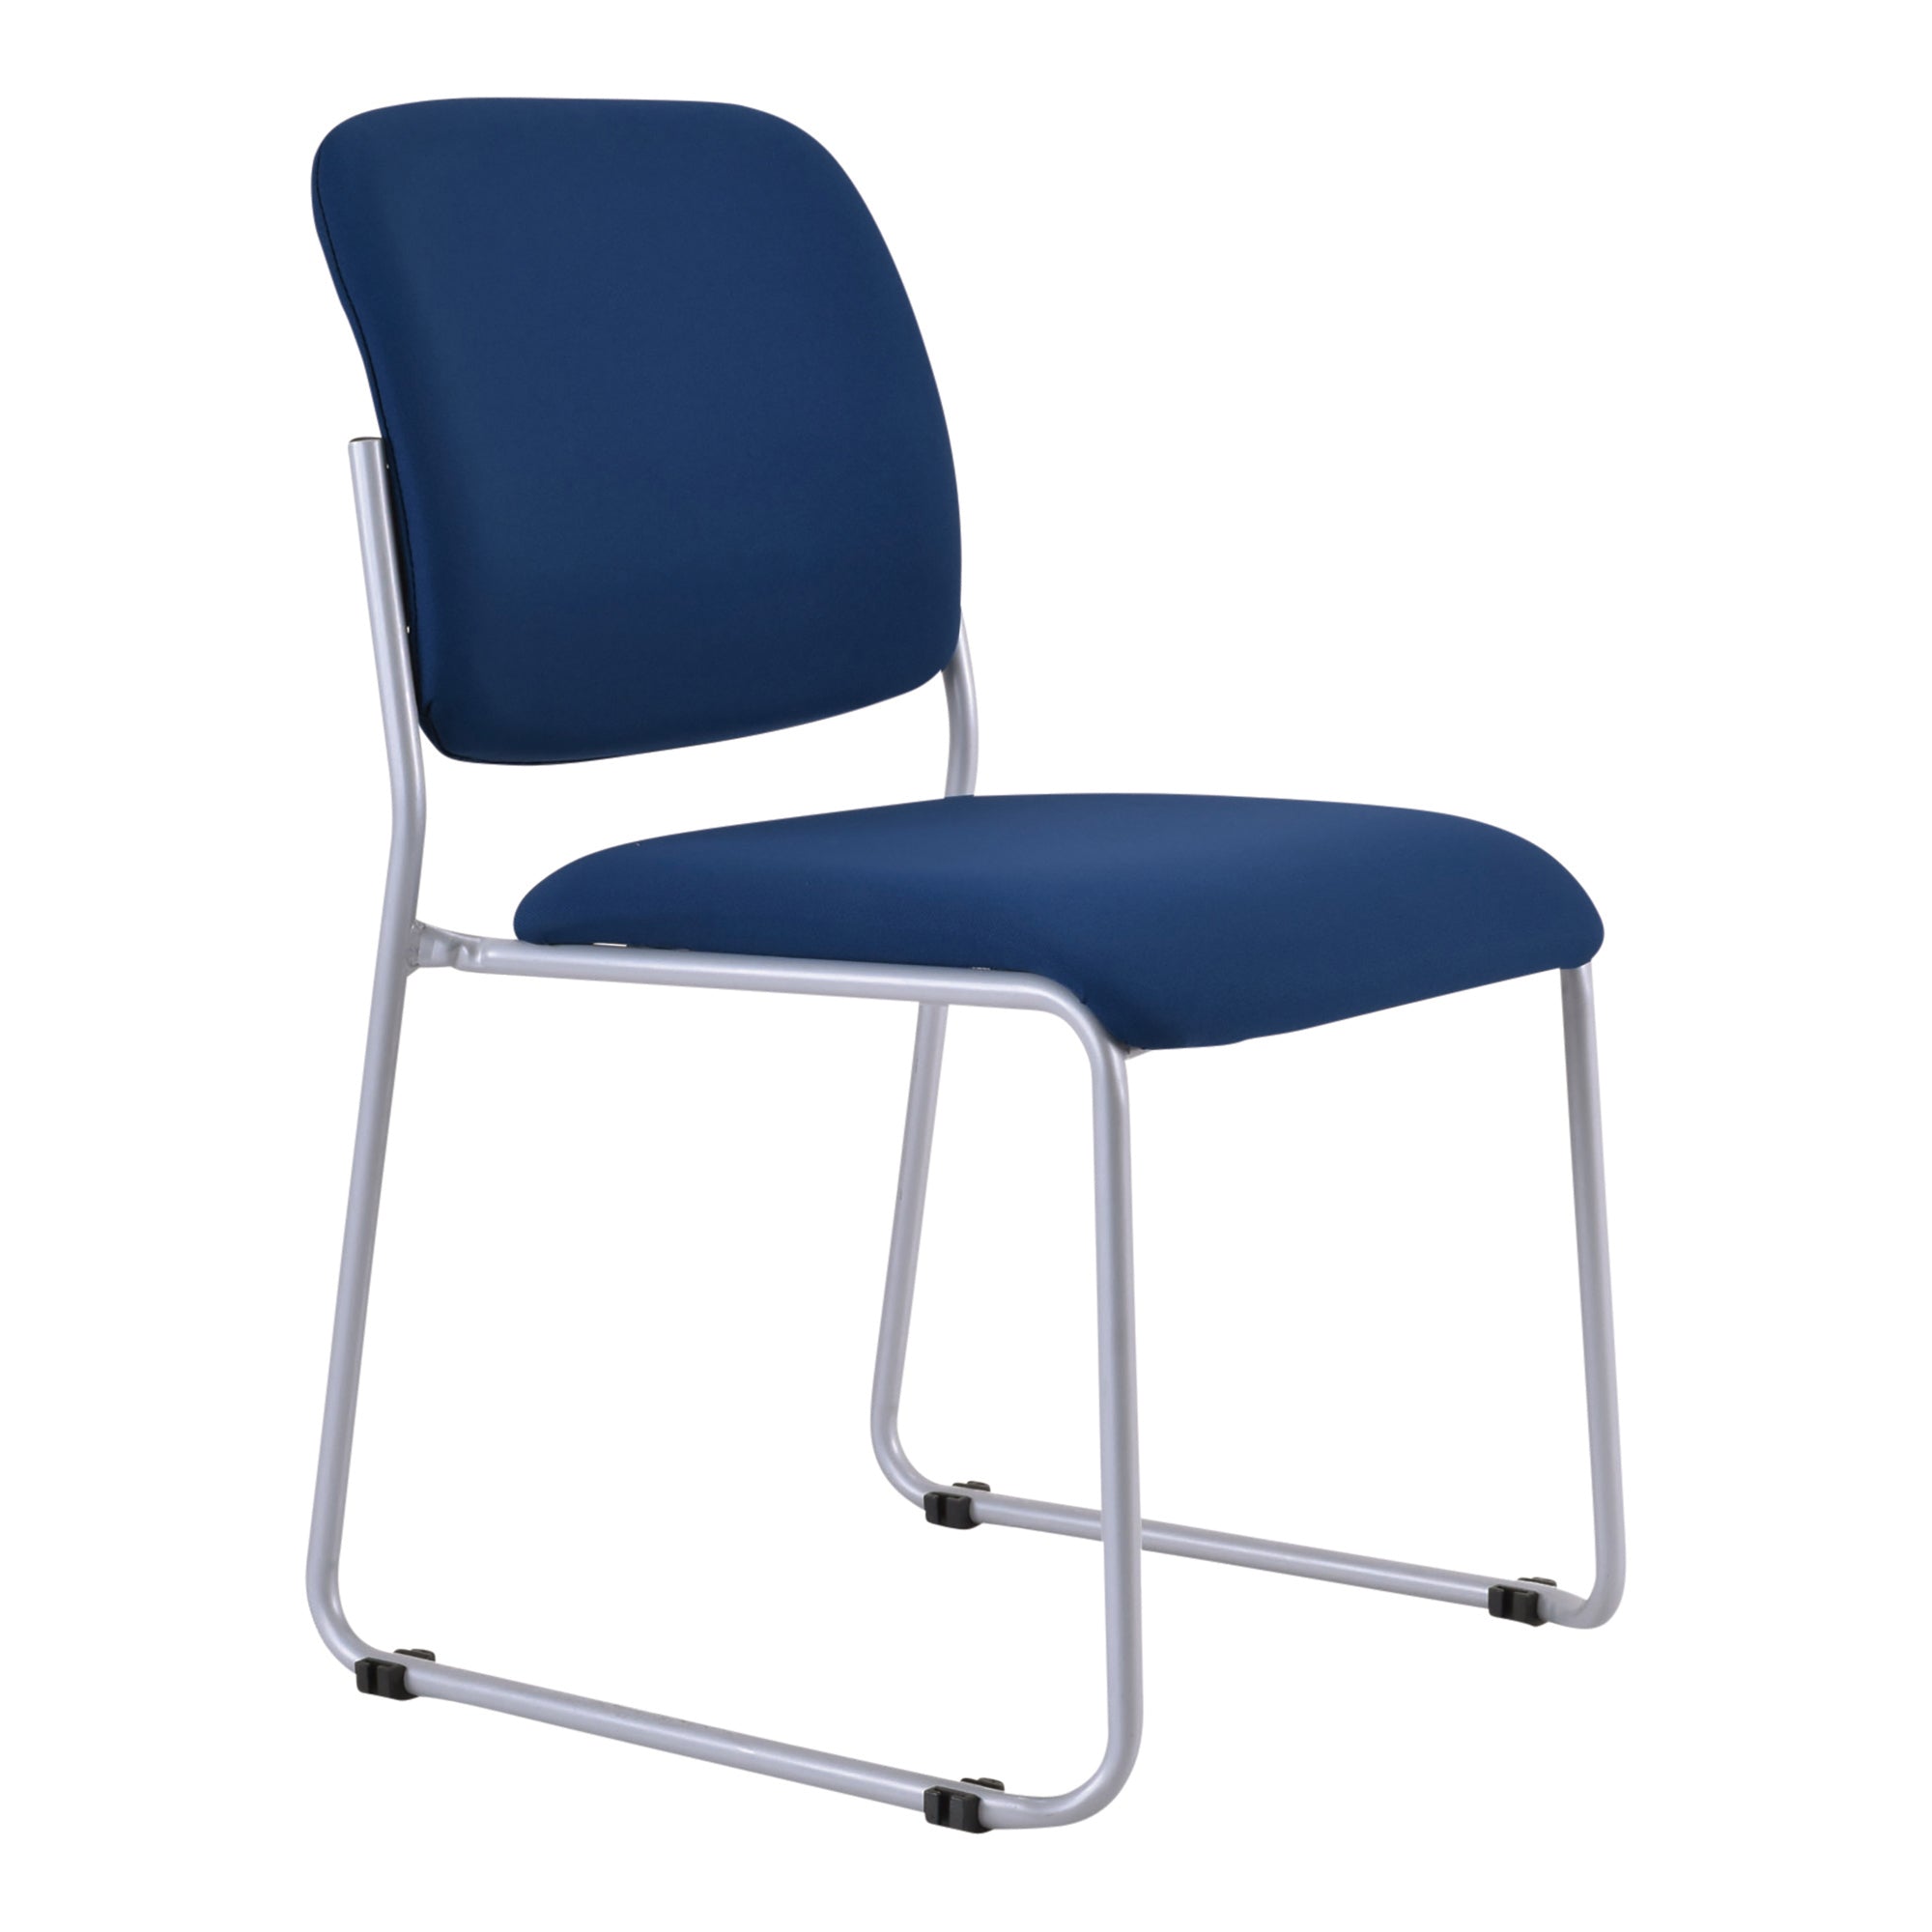 Mario stackable chair with blue fabric back and seat and steel skid base frame